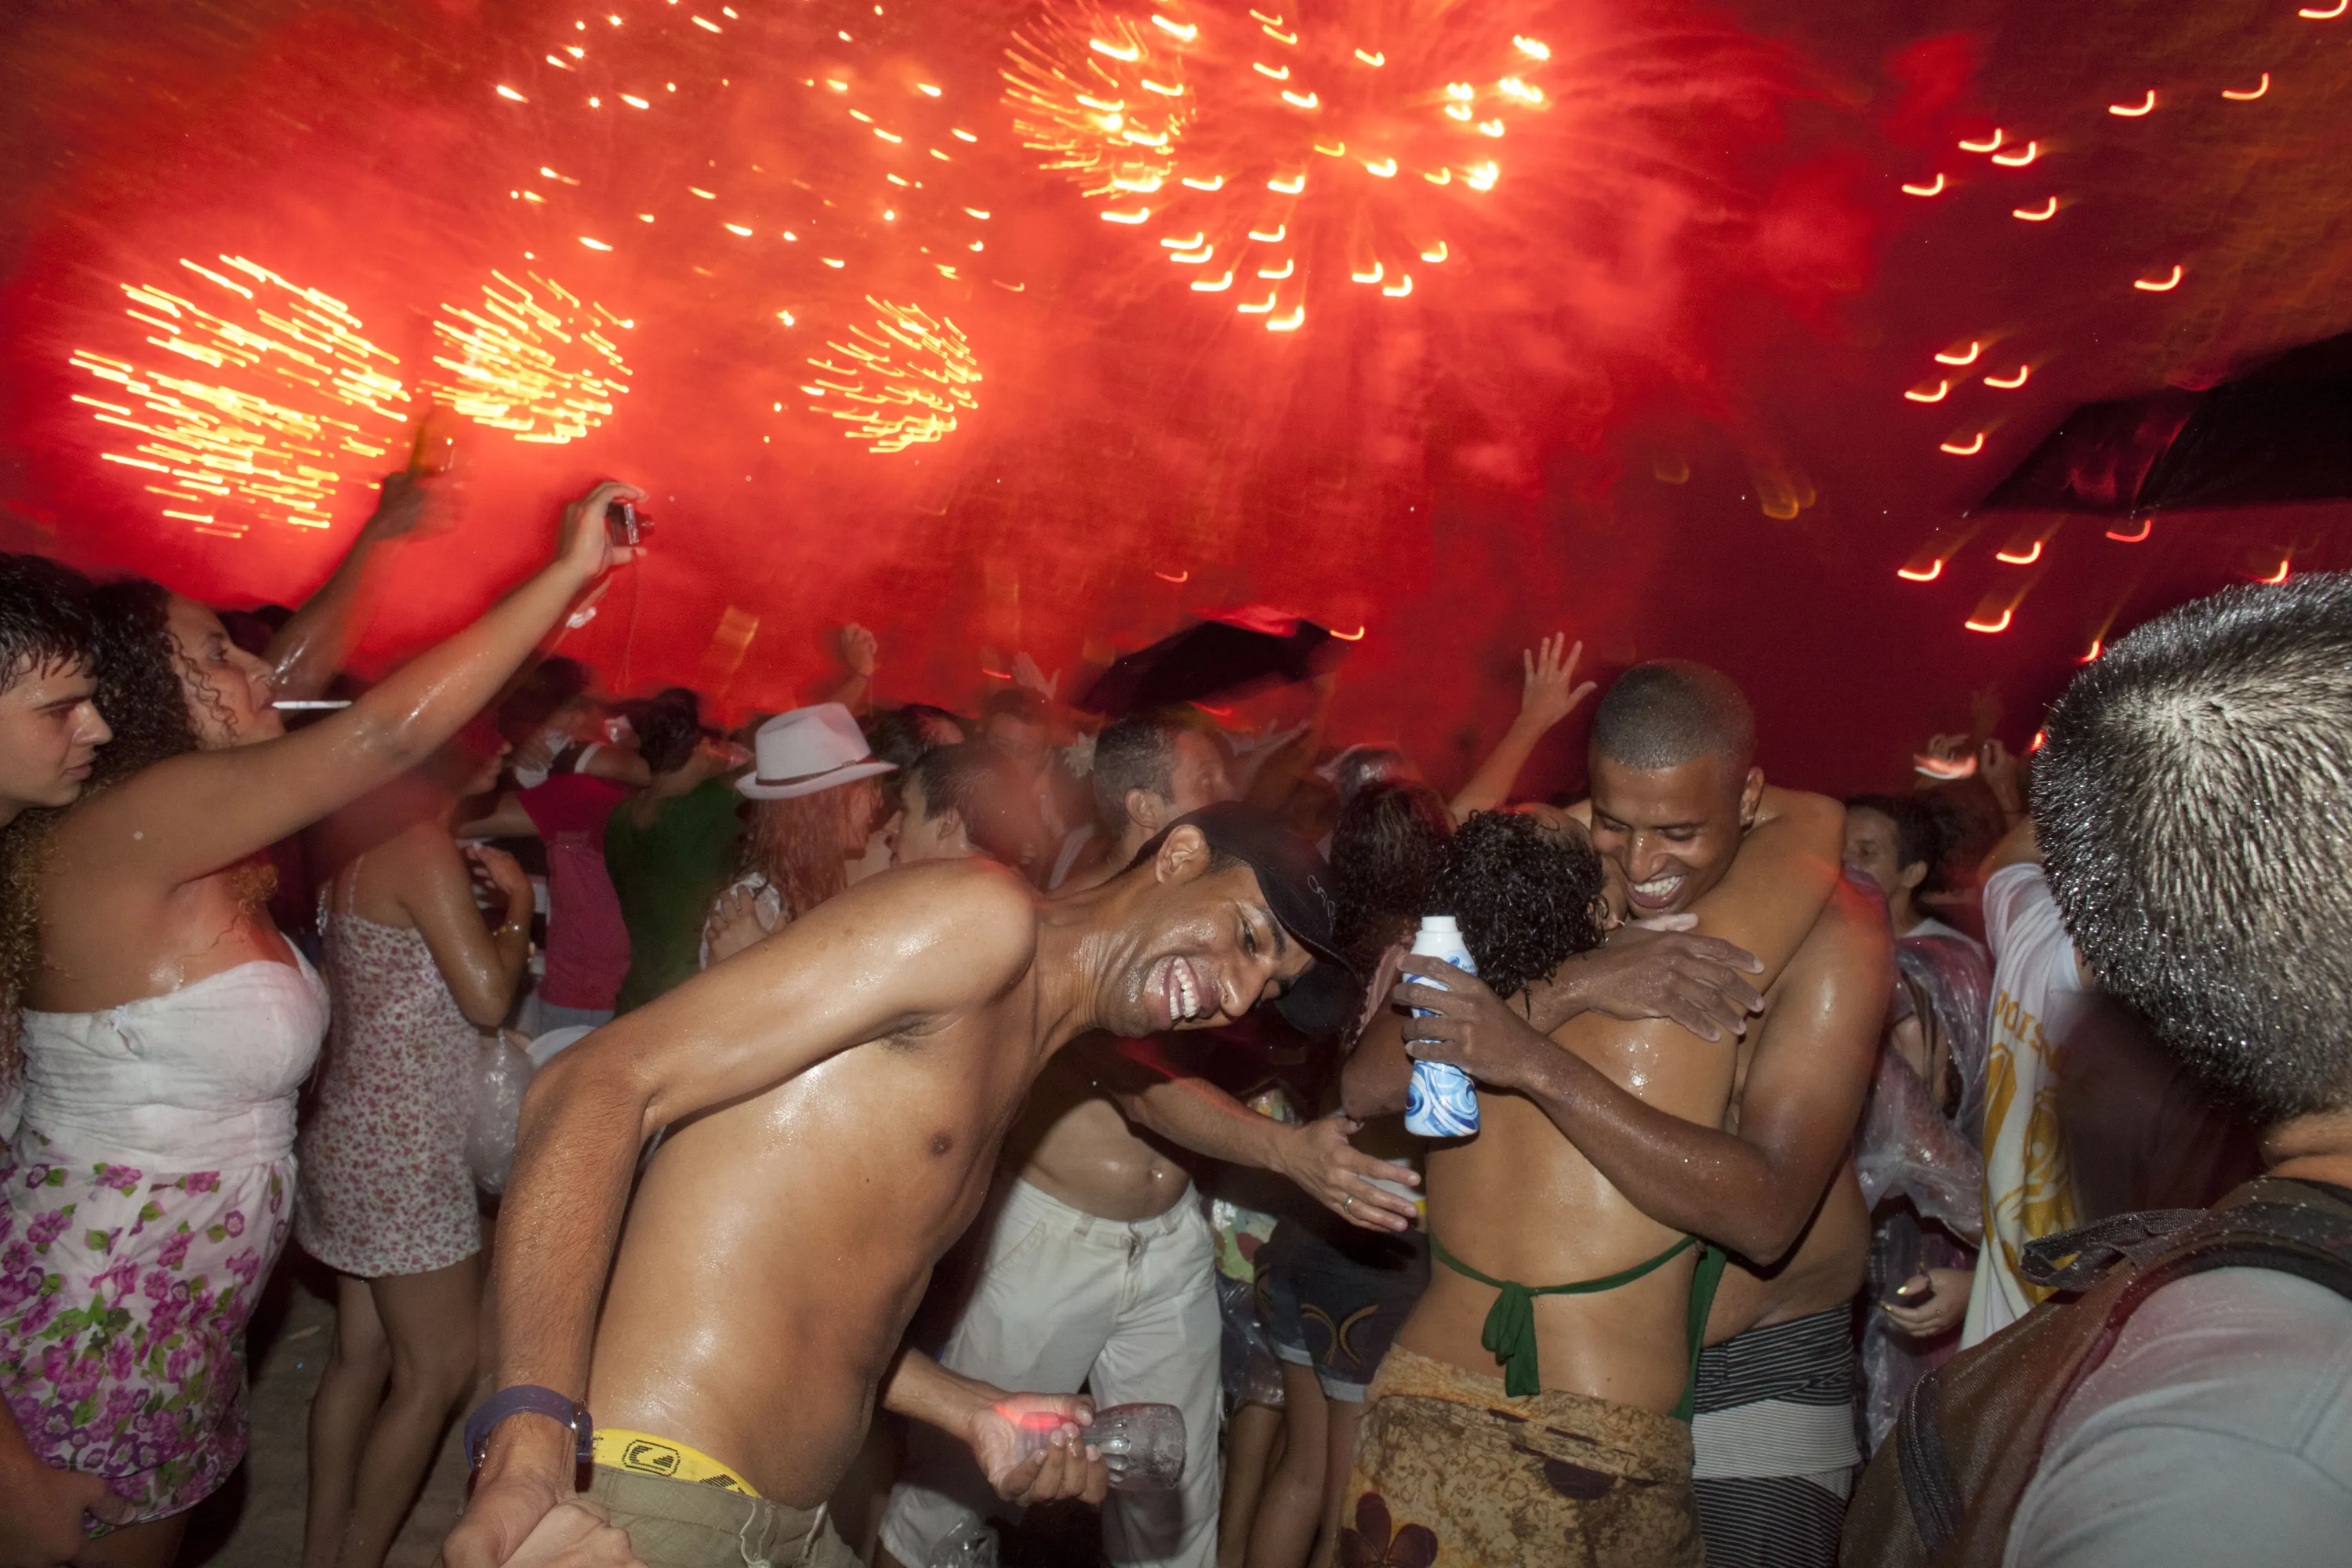 Brazilians Flock To Ocean For New Year's Eve Ritual.